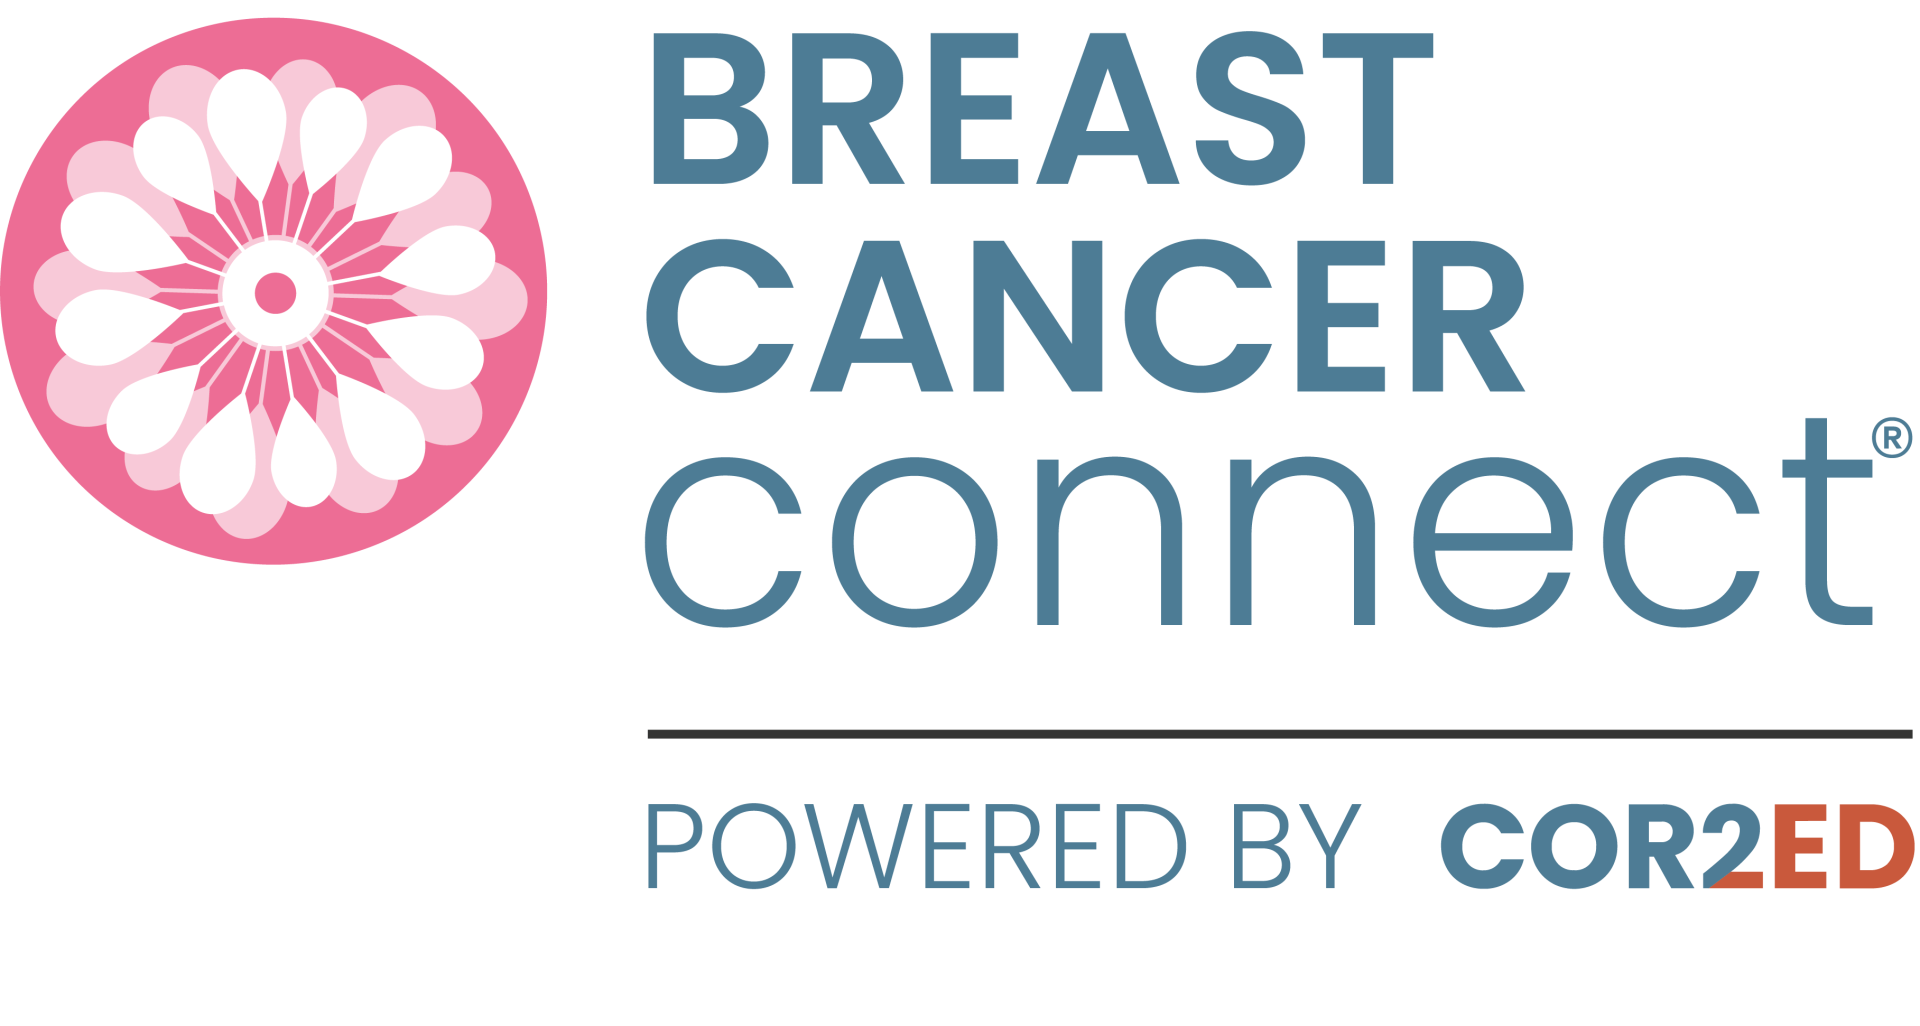 BREAST CANCER CONNECT